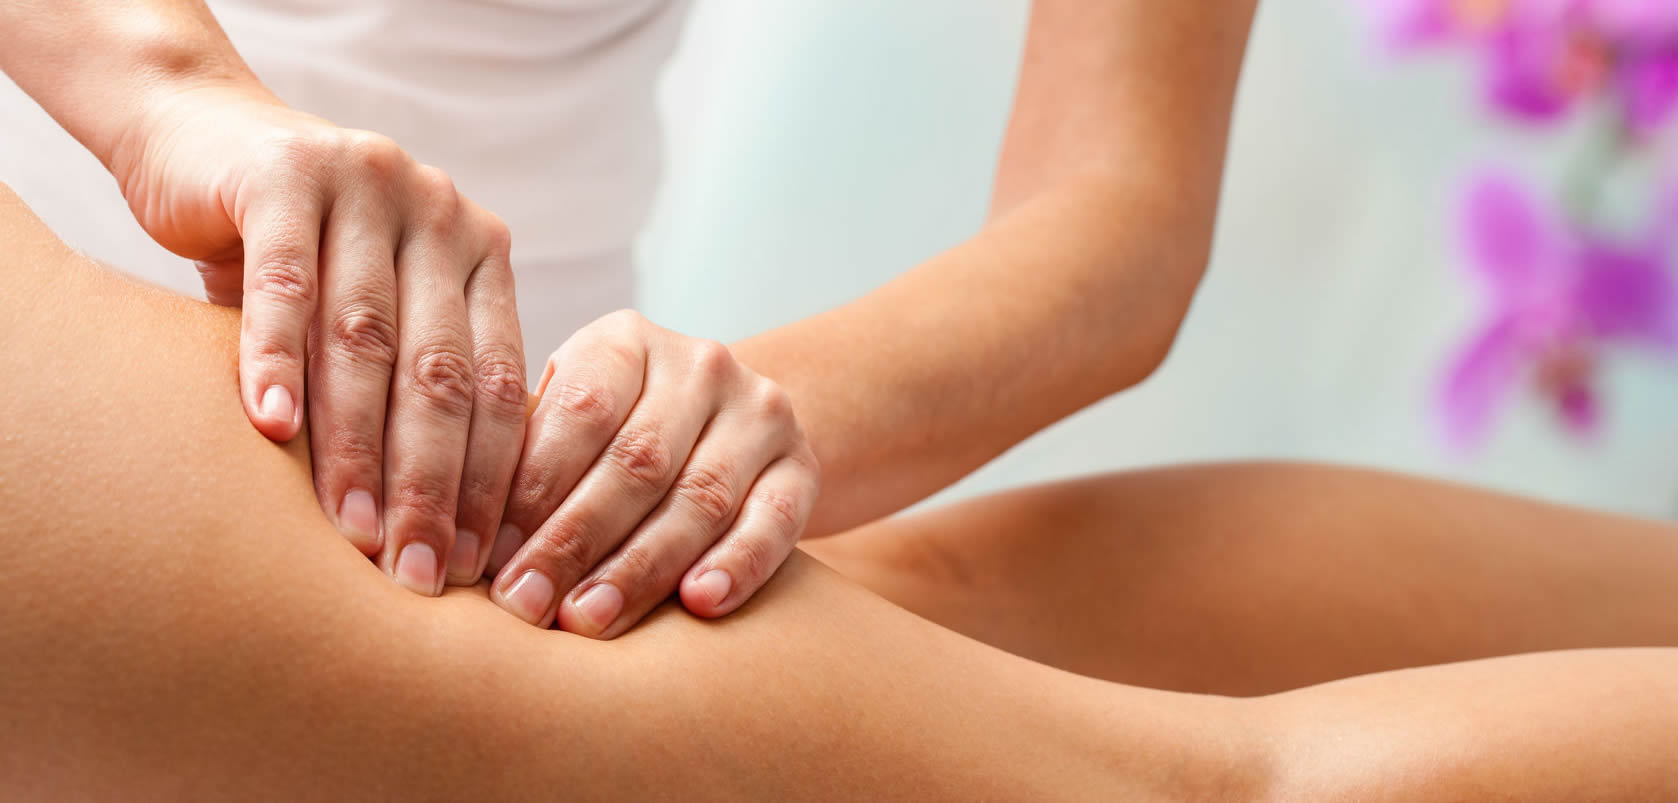 Fibrous Cellulite: Palpating and rolling is the adequate Anti-cellulite massage technique